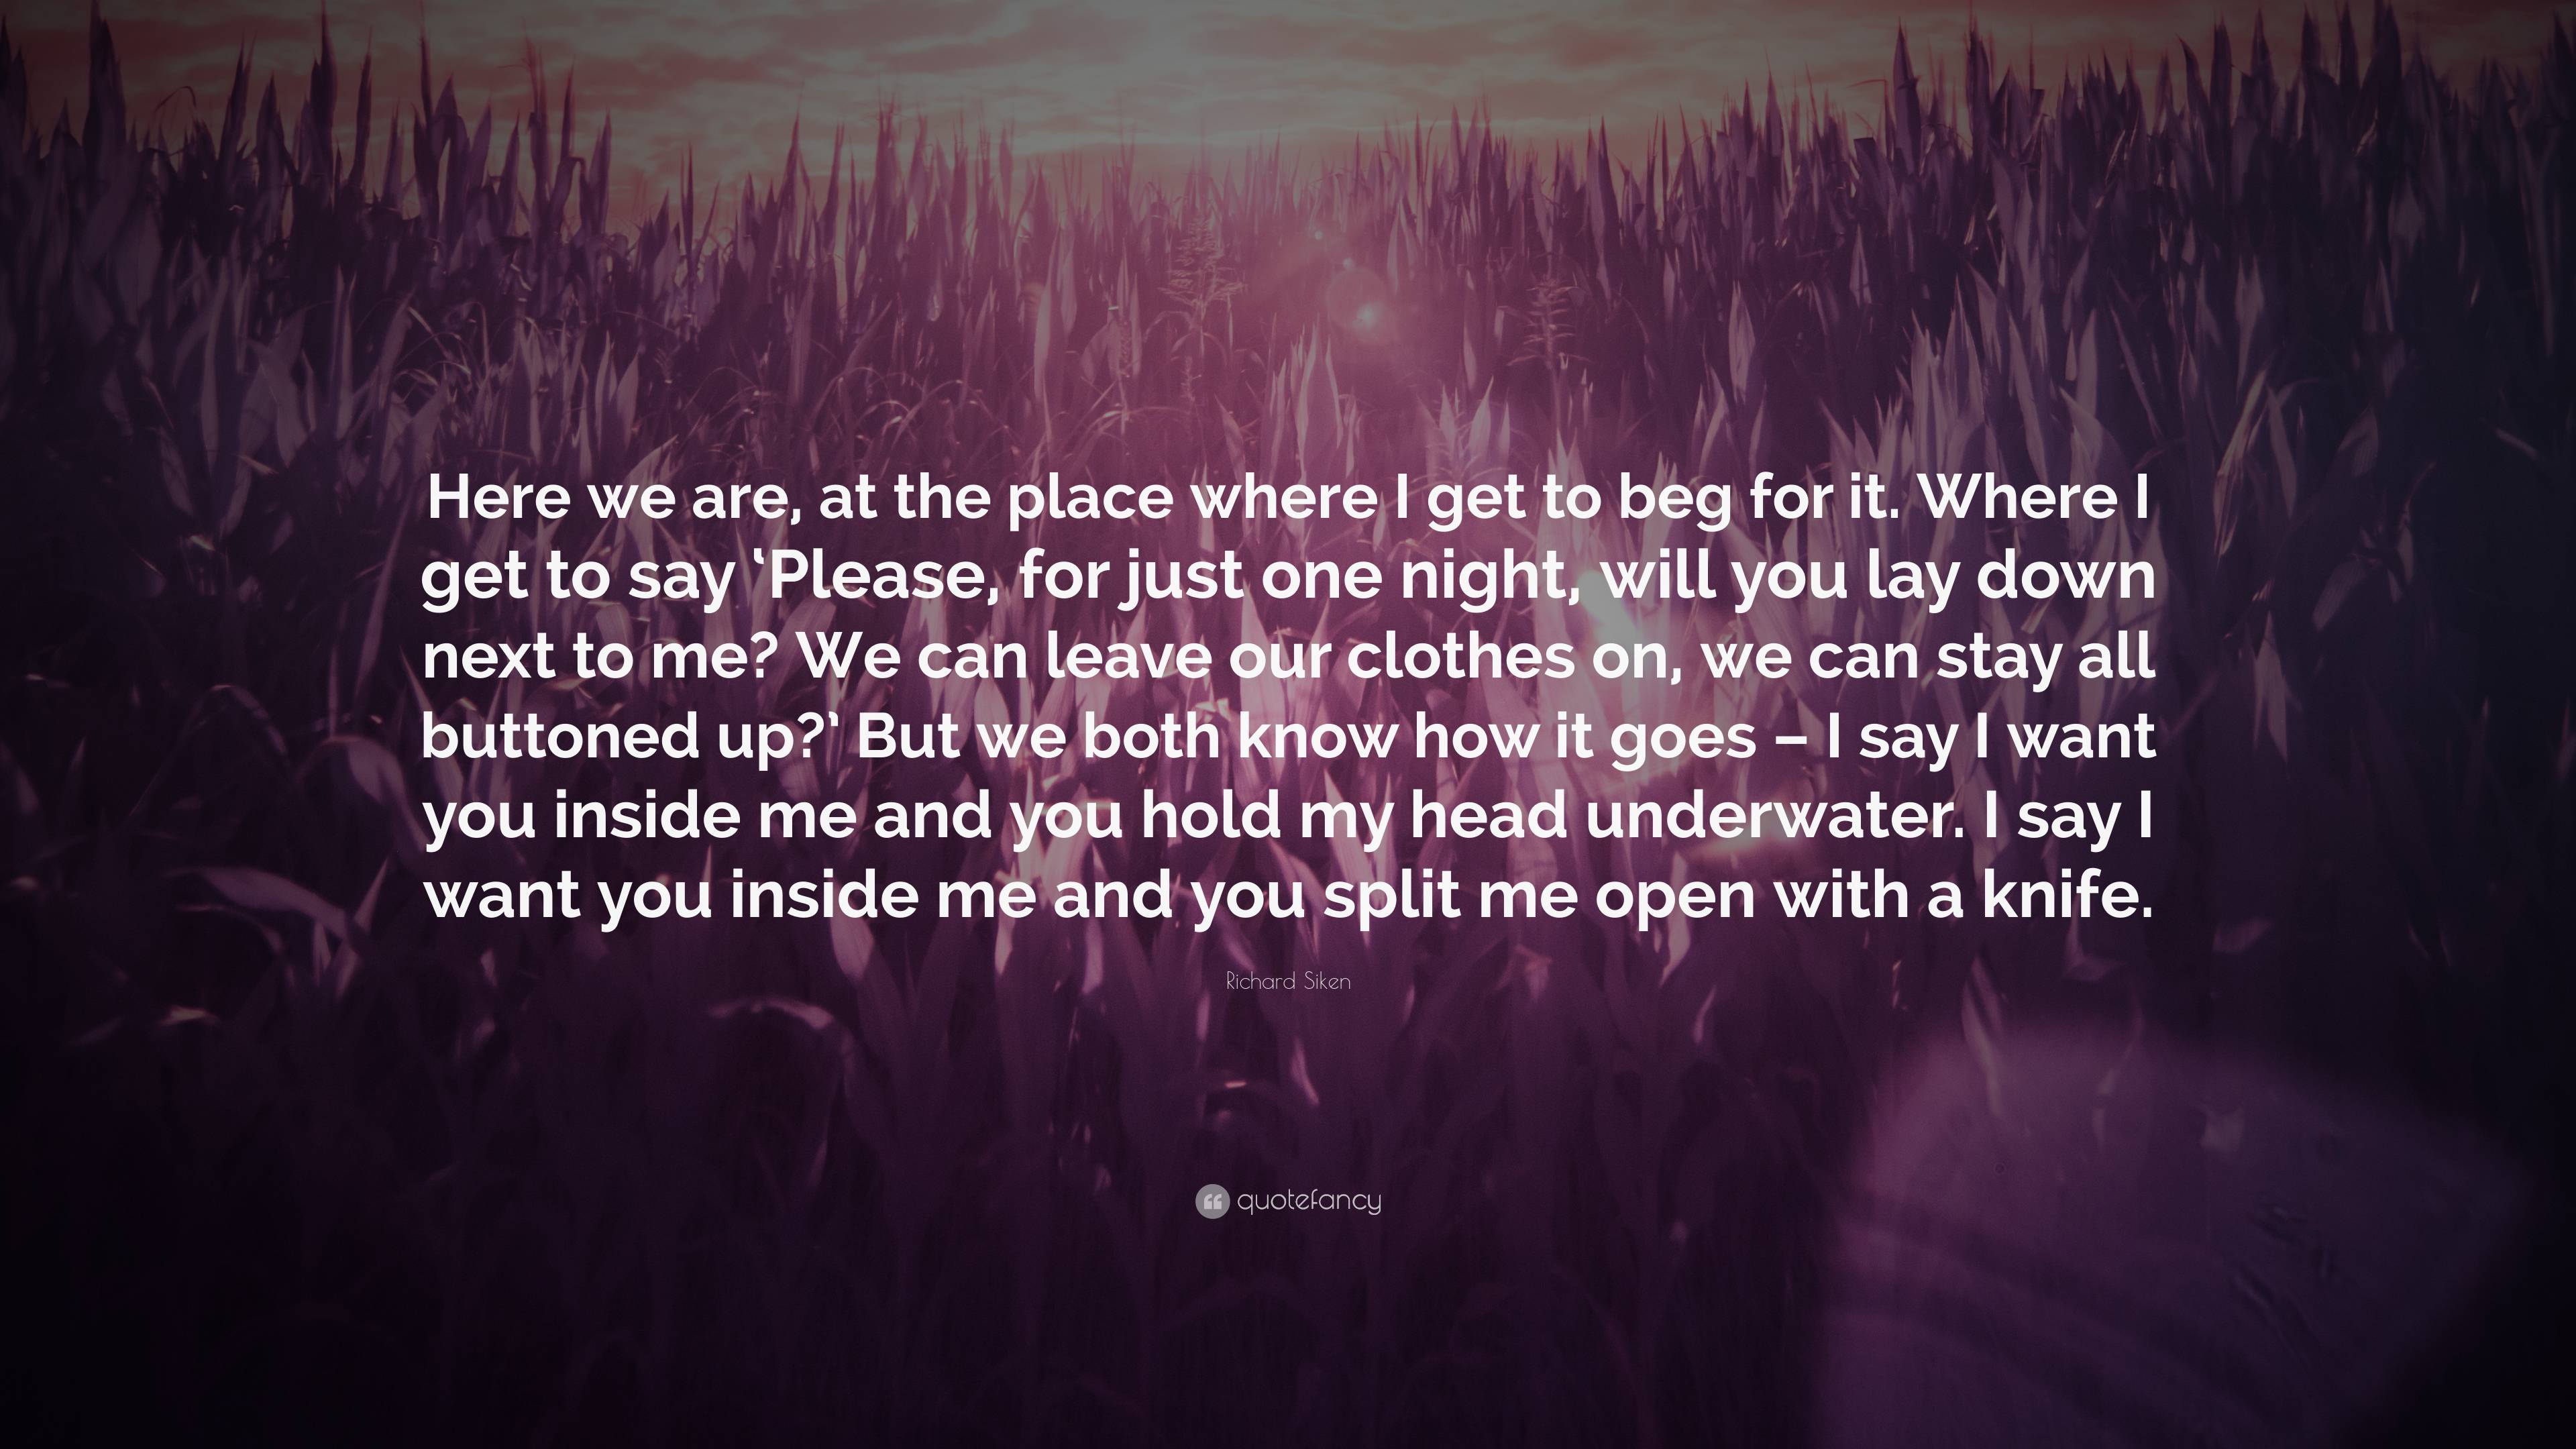 Richard Siken Quote: “Here we are, at the place where I get to beg